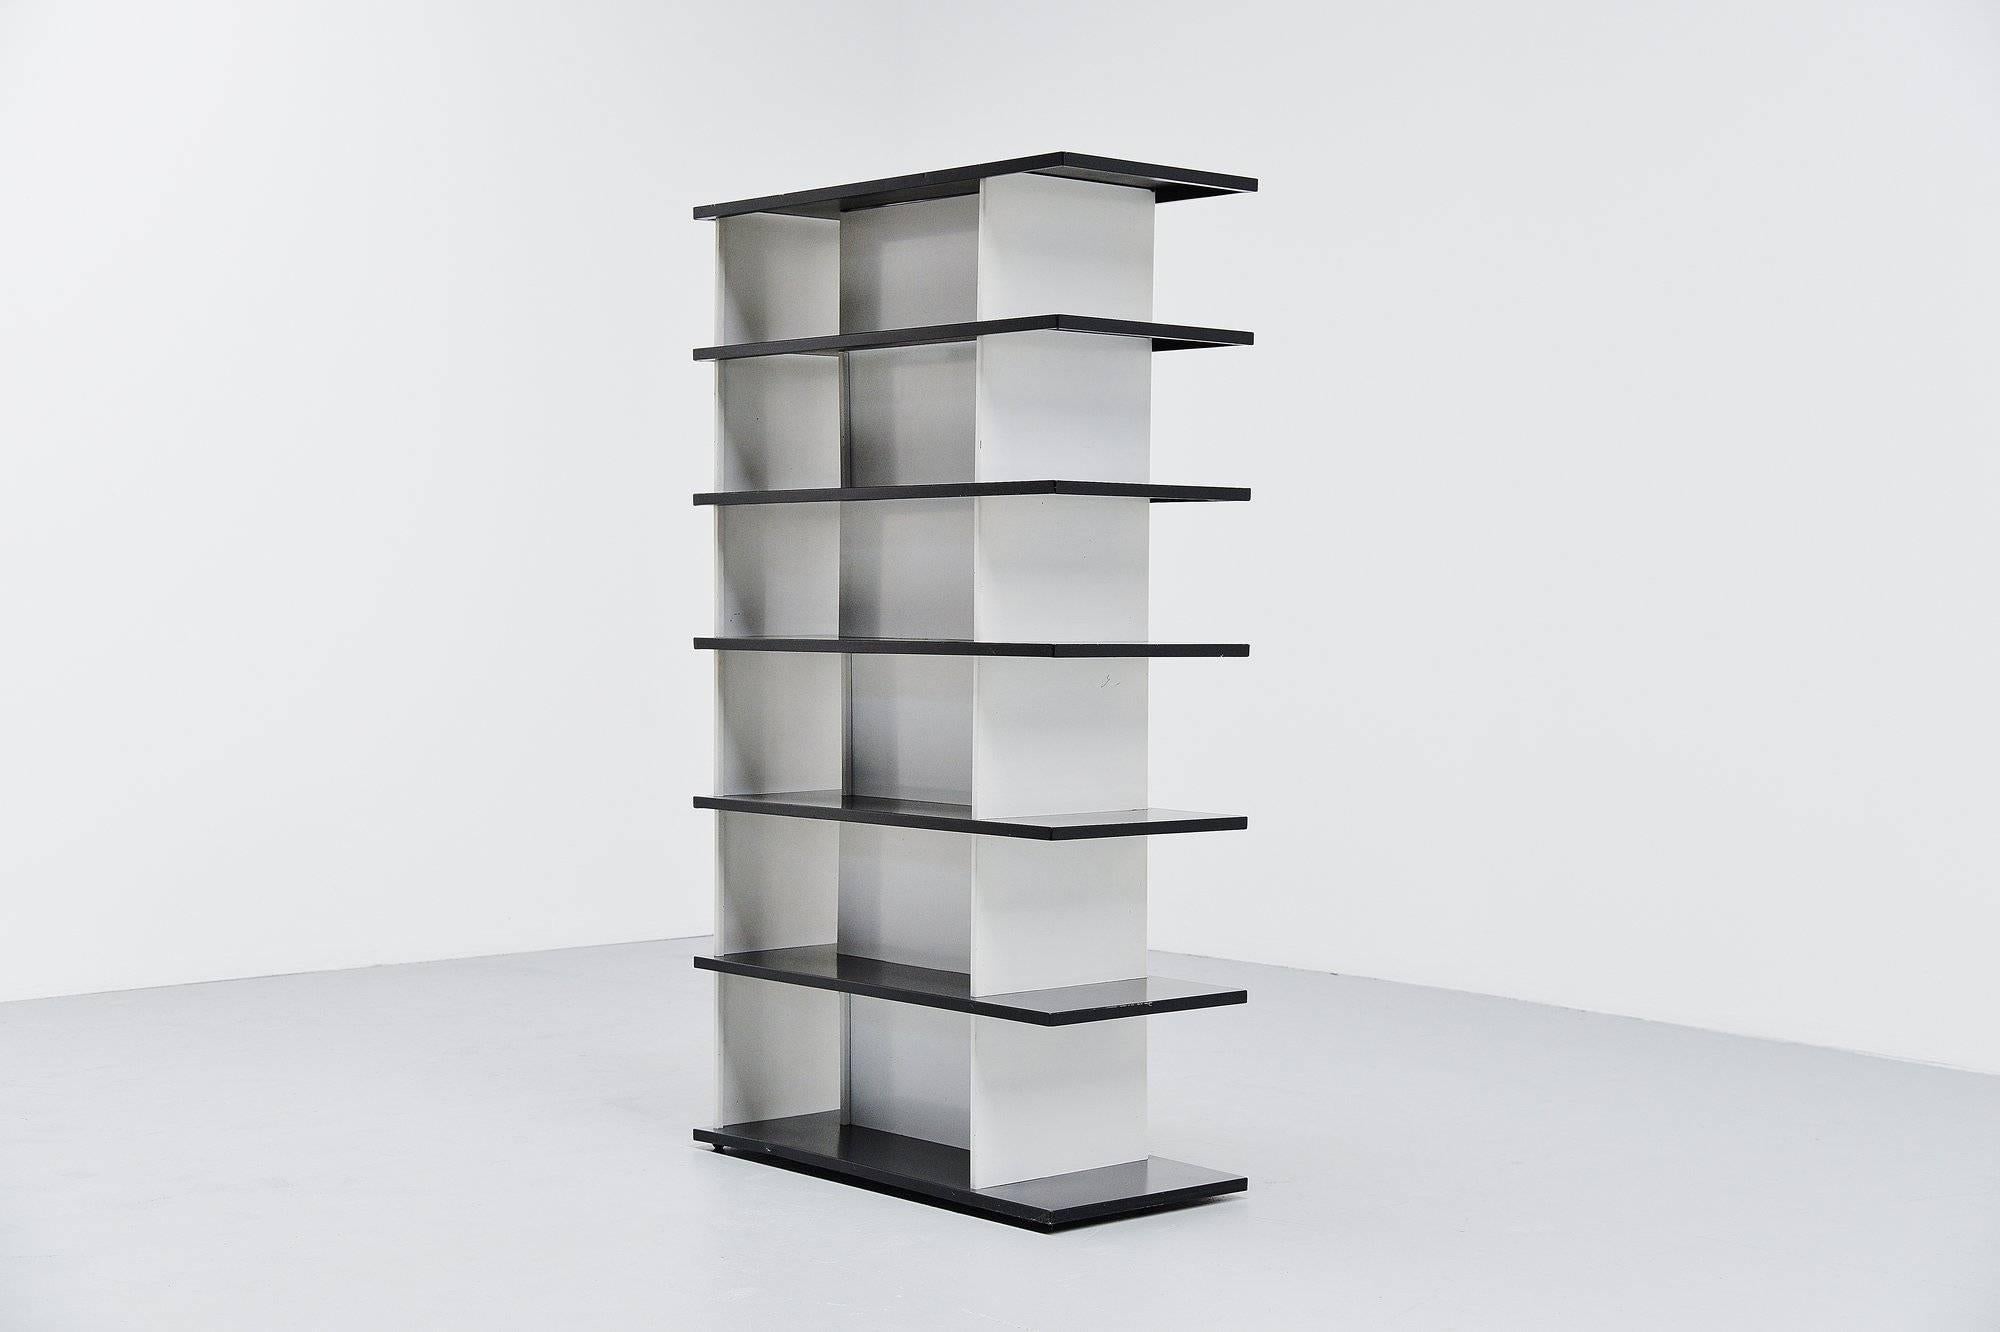 Very impressive bookcase or room divider designed by Industrial designer Wim Rietveld, son of Gerrit Rietveld. The origin of this bookcase was a big question, but it was made for exclusive department store De Bijenkorf in 1960. De Bijenkorf sold a